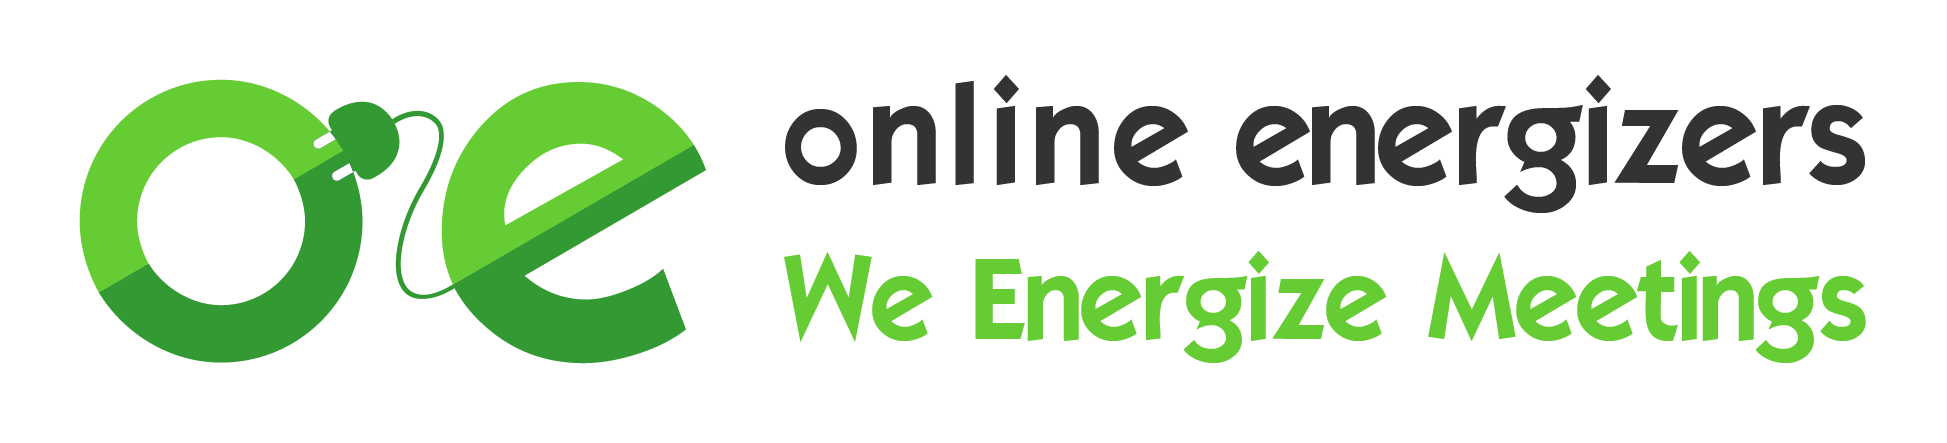 Online Energizers make meetings video conferences nicer and efficient meetings /></div></div><div class=